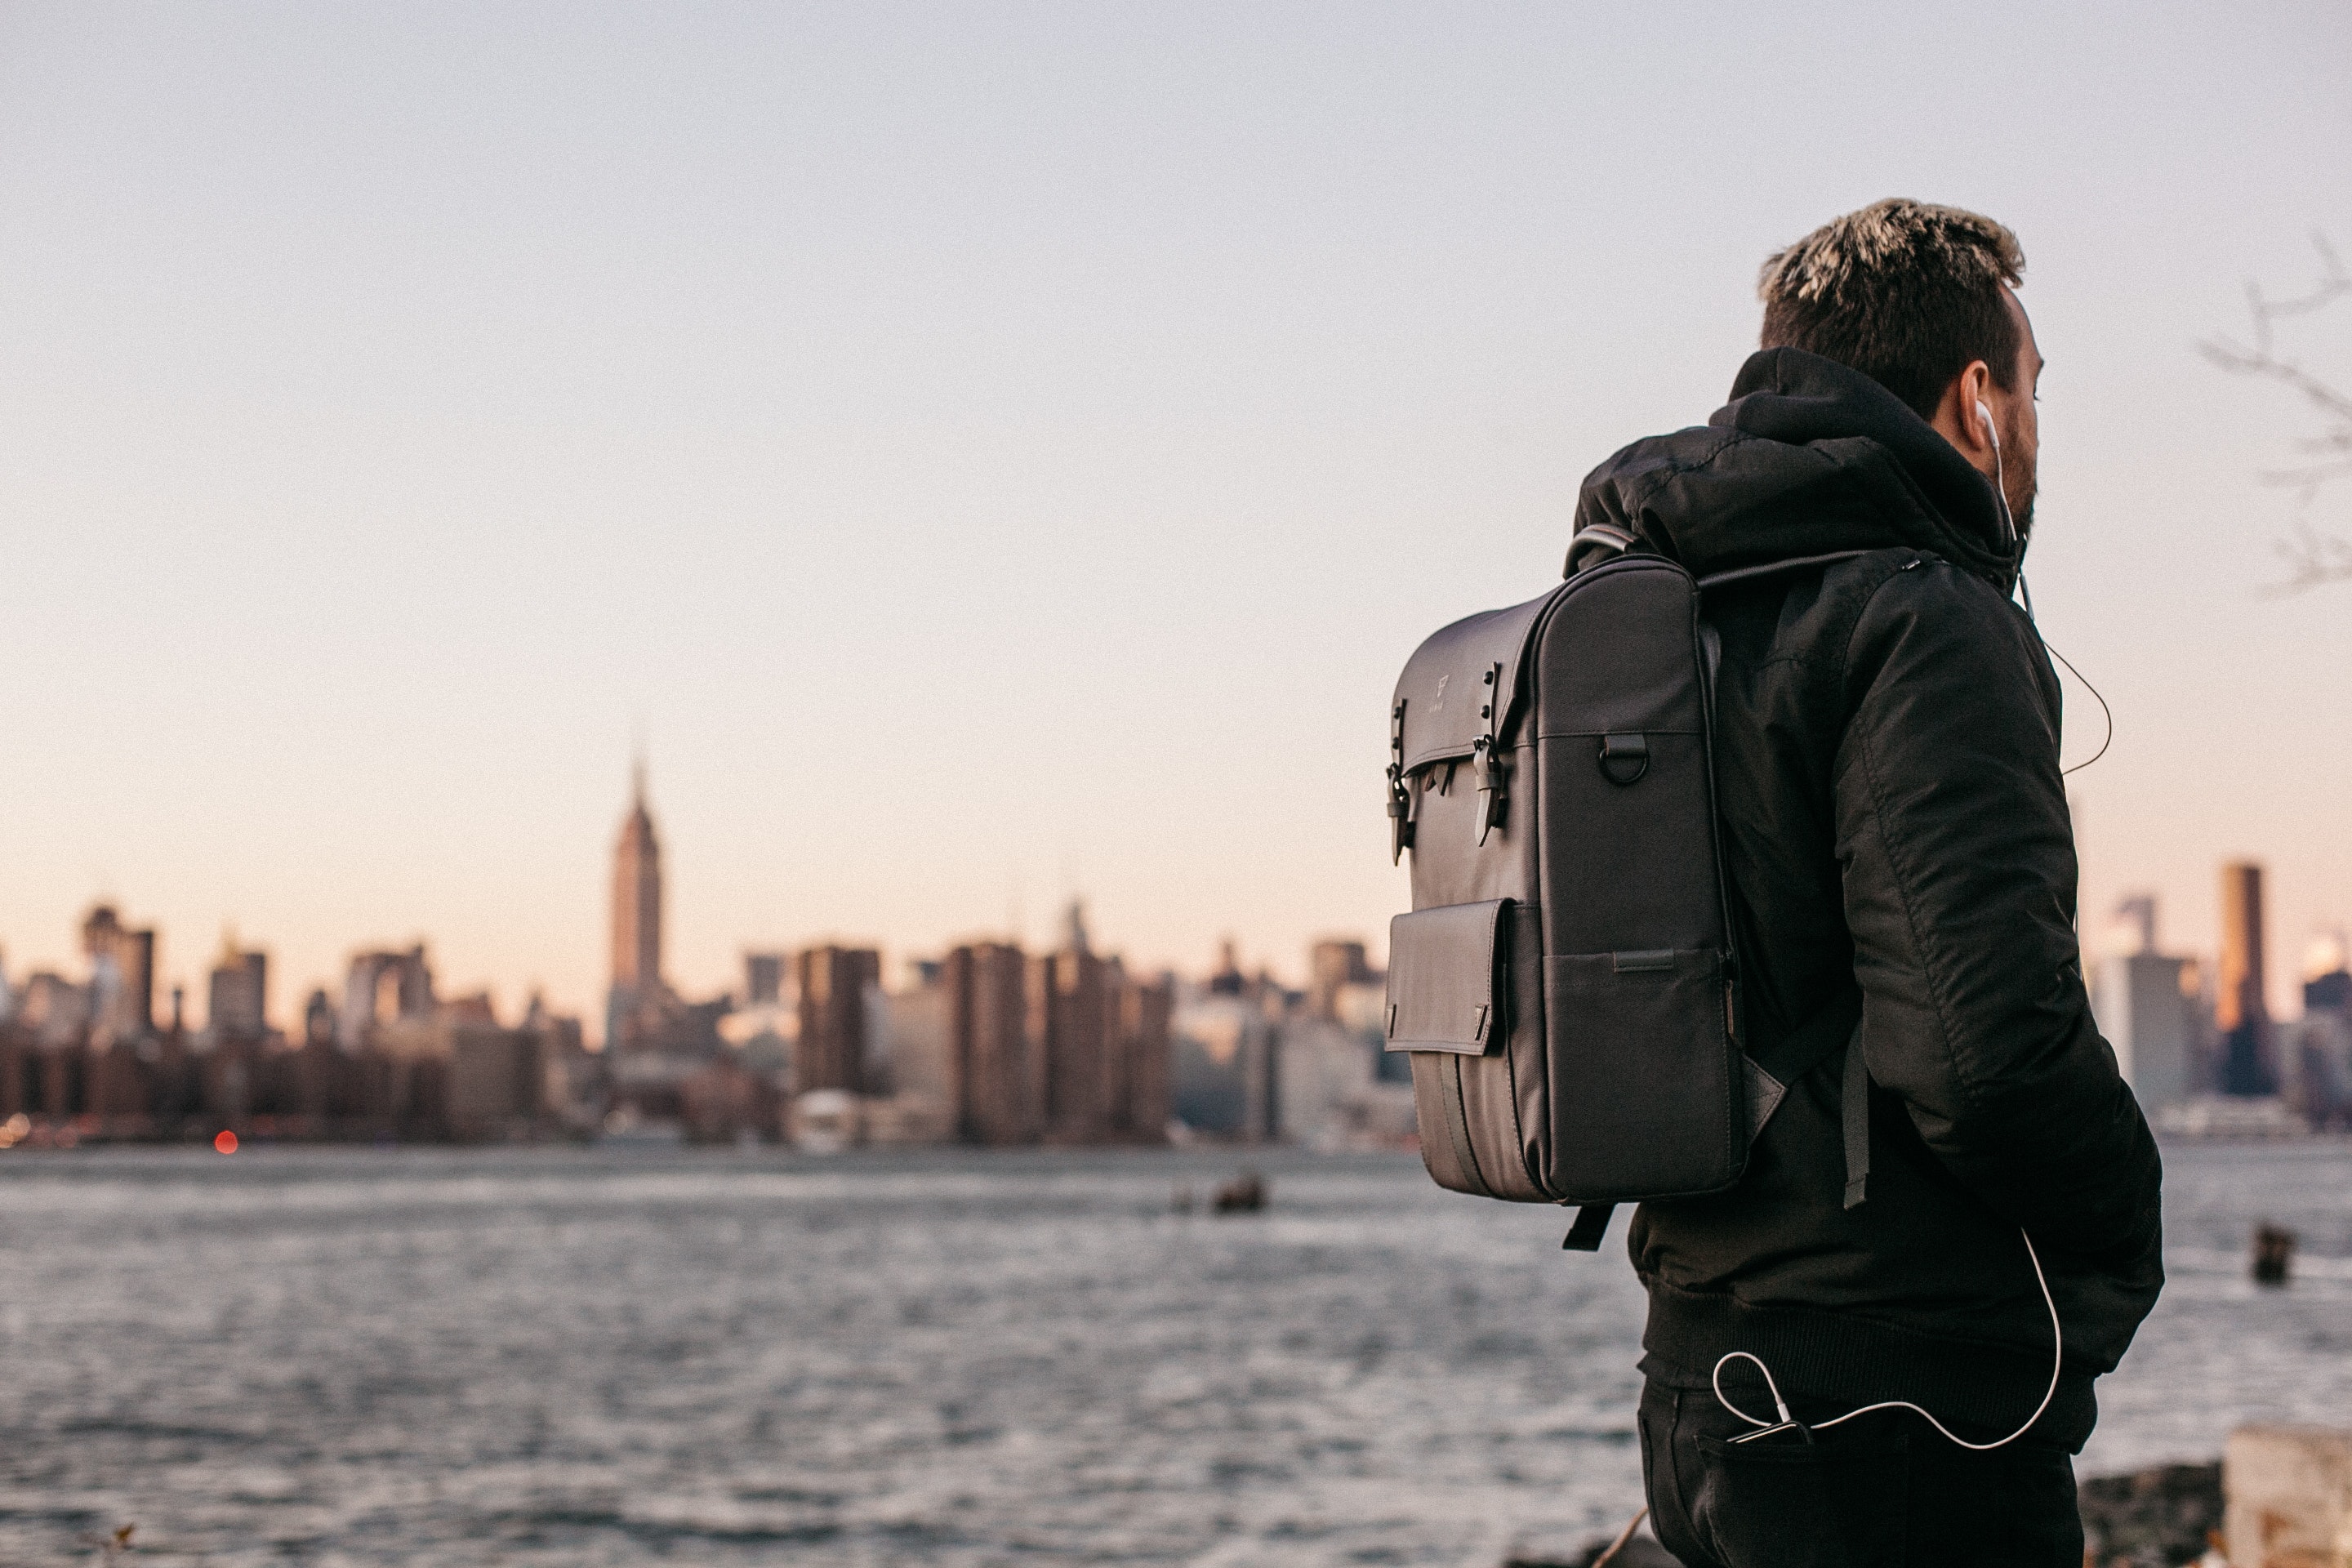 Man Wearing Black Bubble Jacket and Black Leather Backpack Near Bay, Architecture, Landscape, Tower, Skyscrapers, HQ Photo